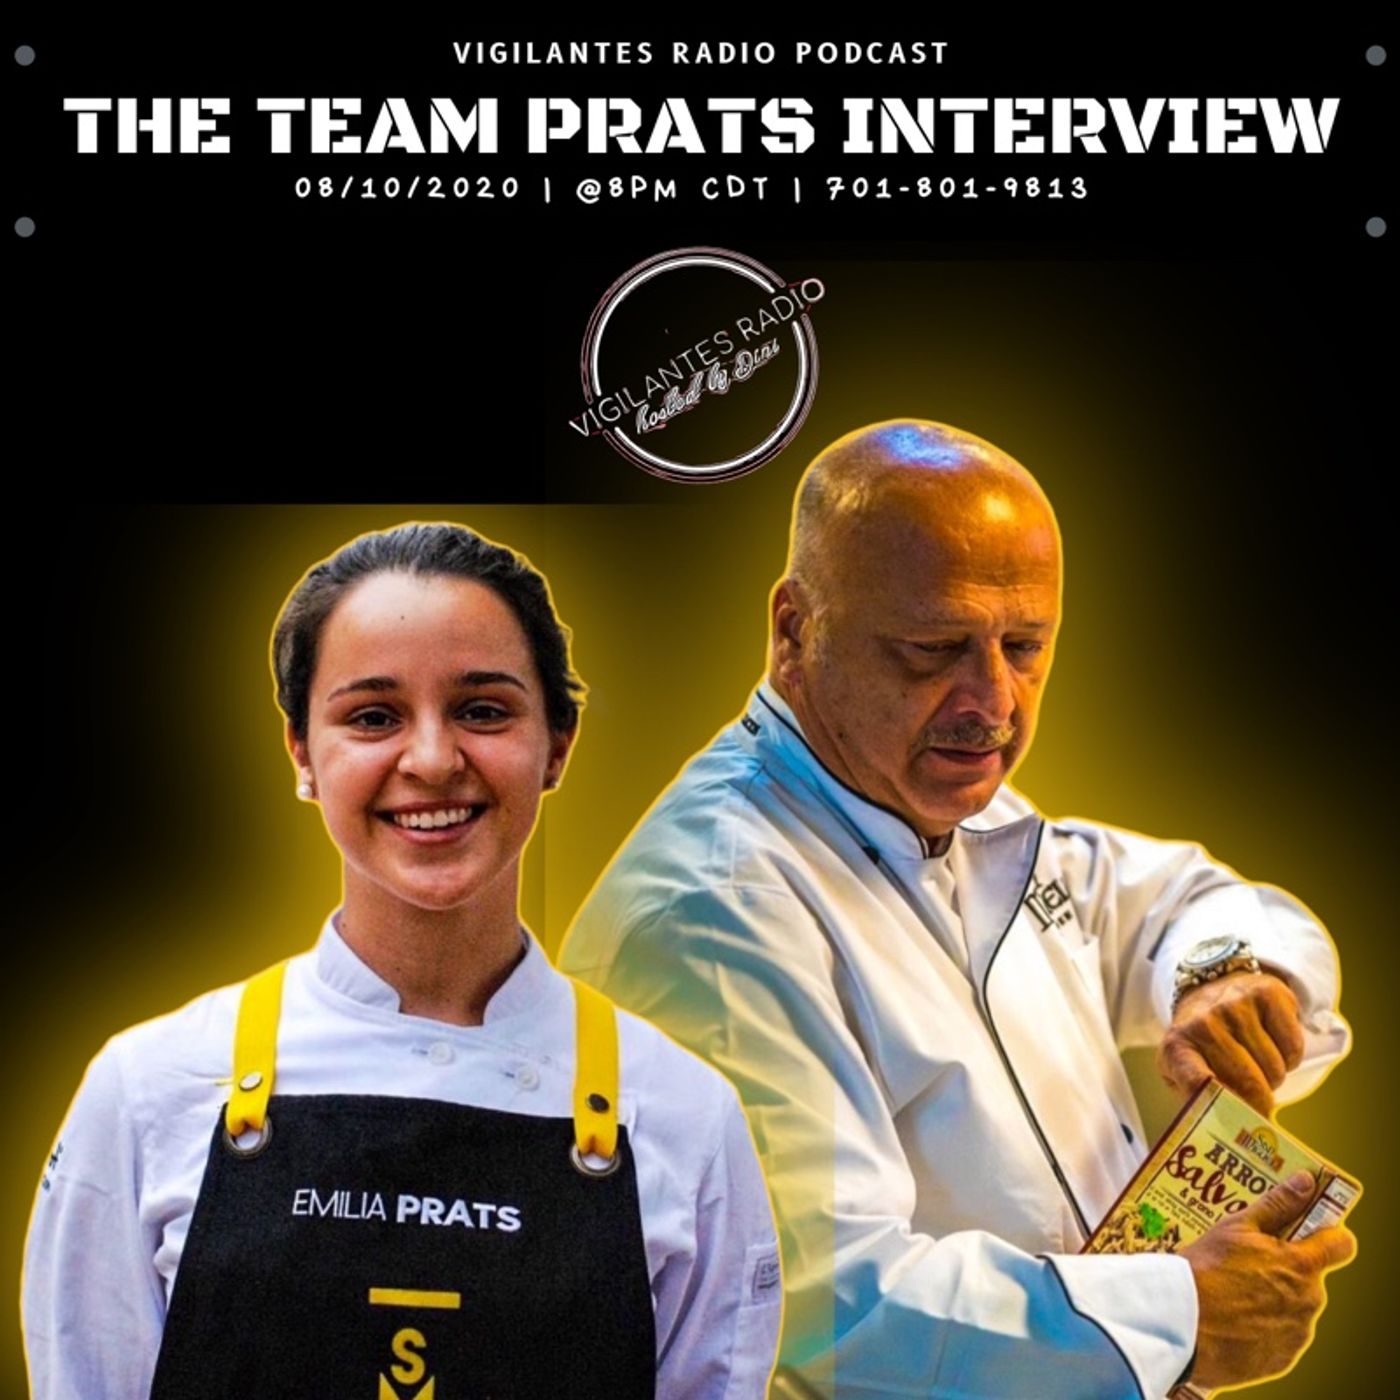 The Team Prats Interview. Image